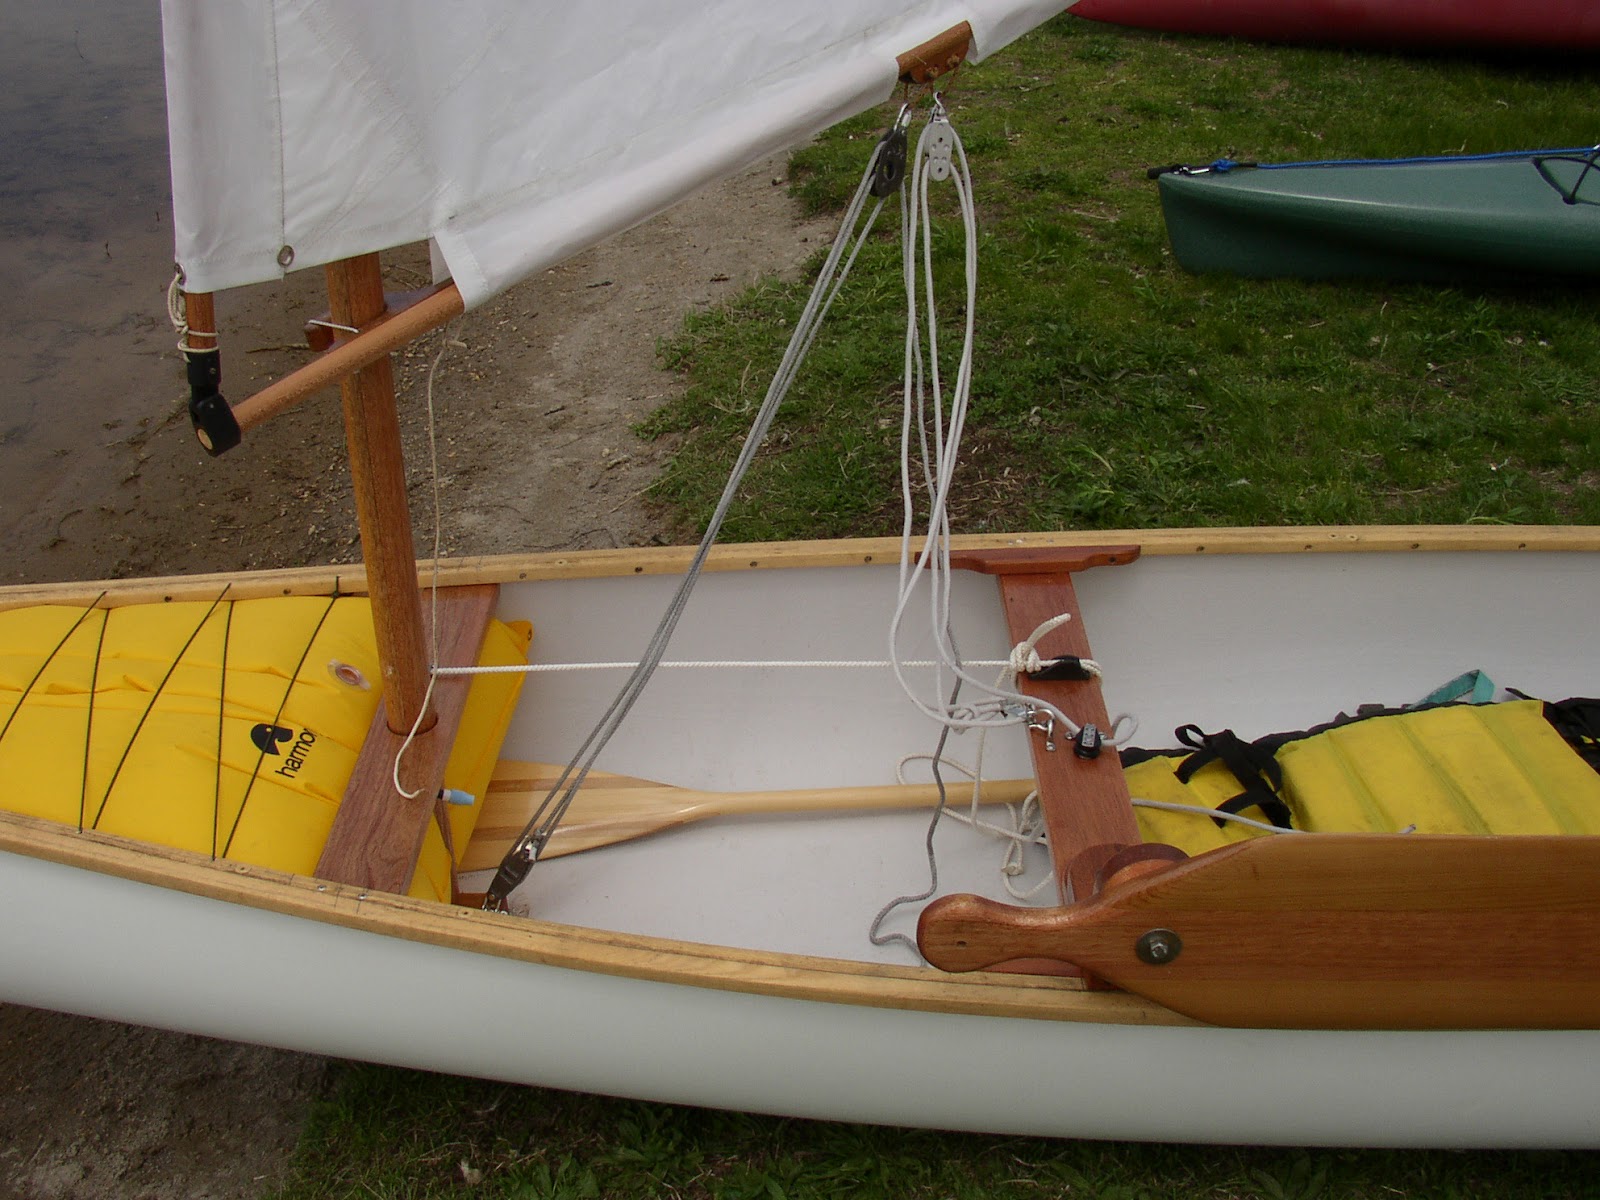 the $ 50 5 hour canoe sail rig the canoe rig described http www 